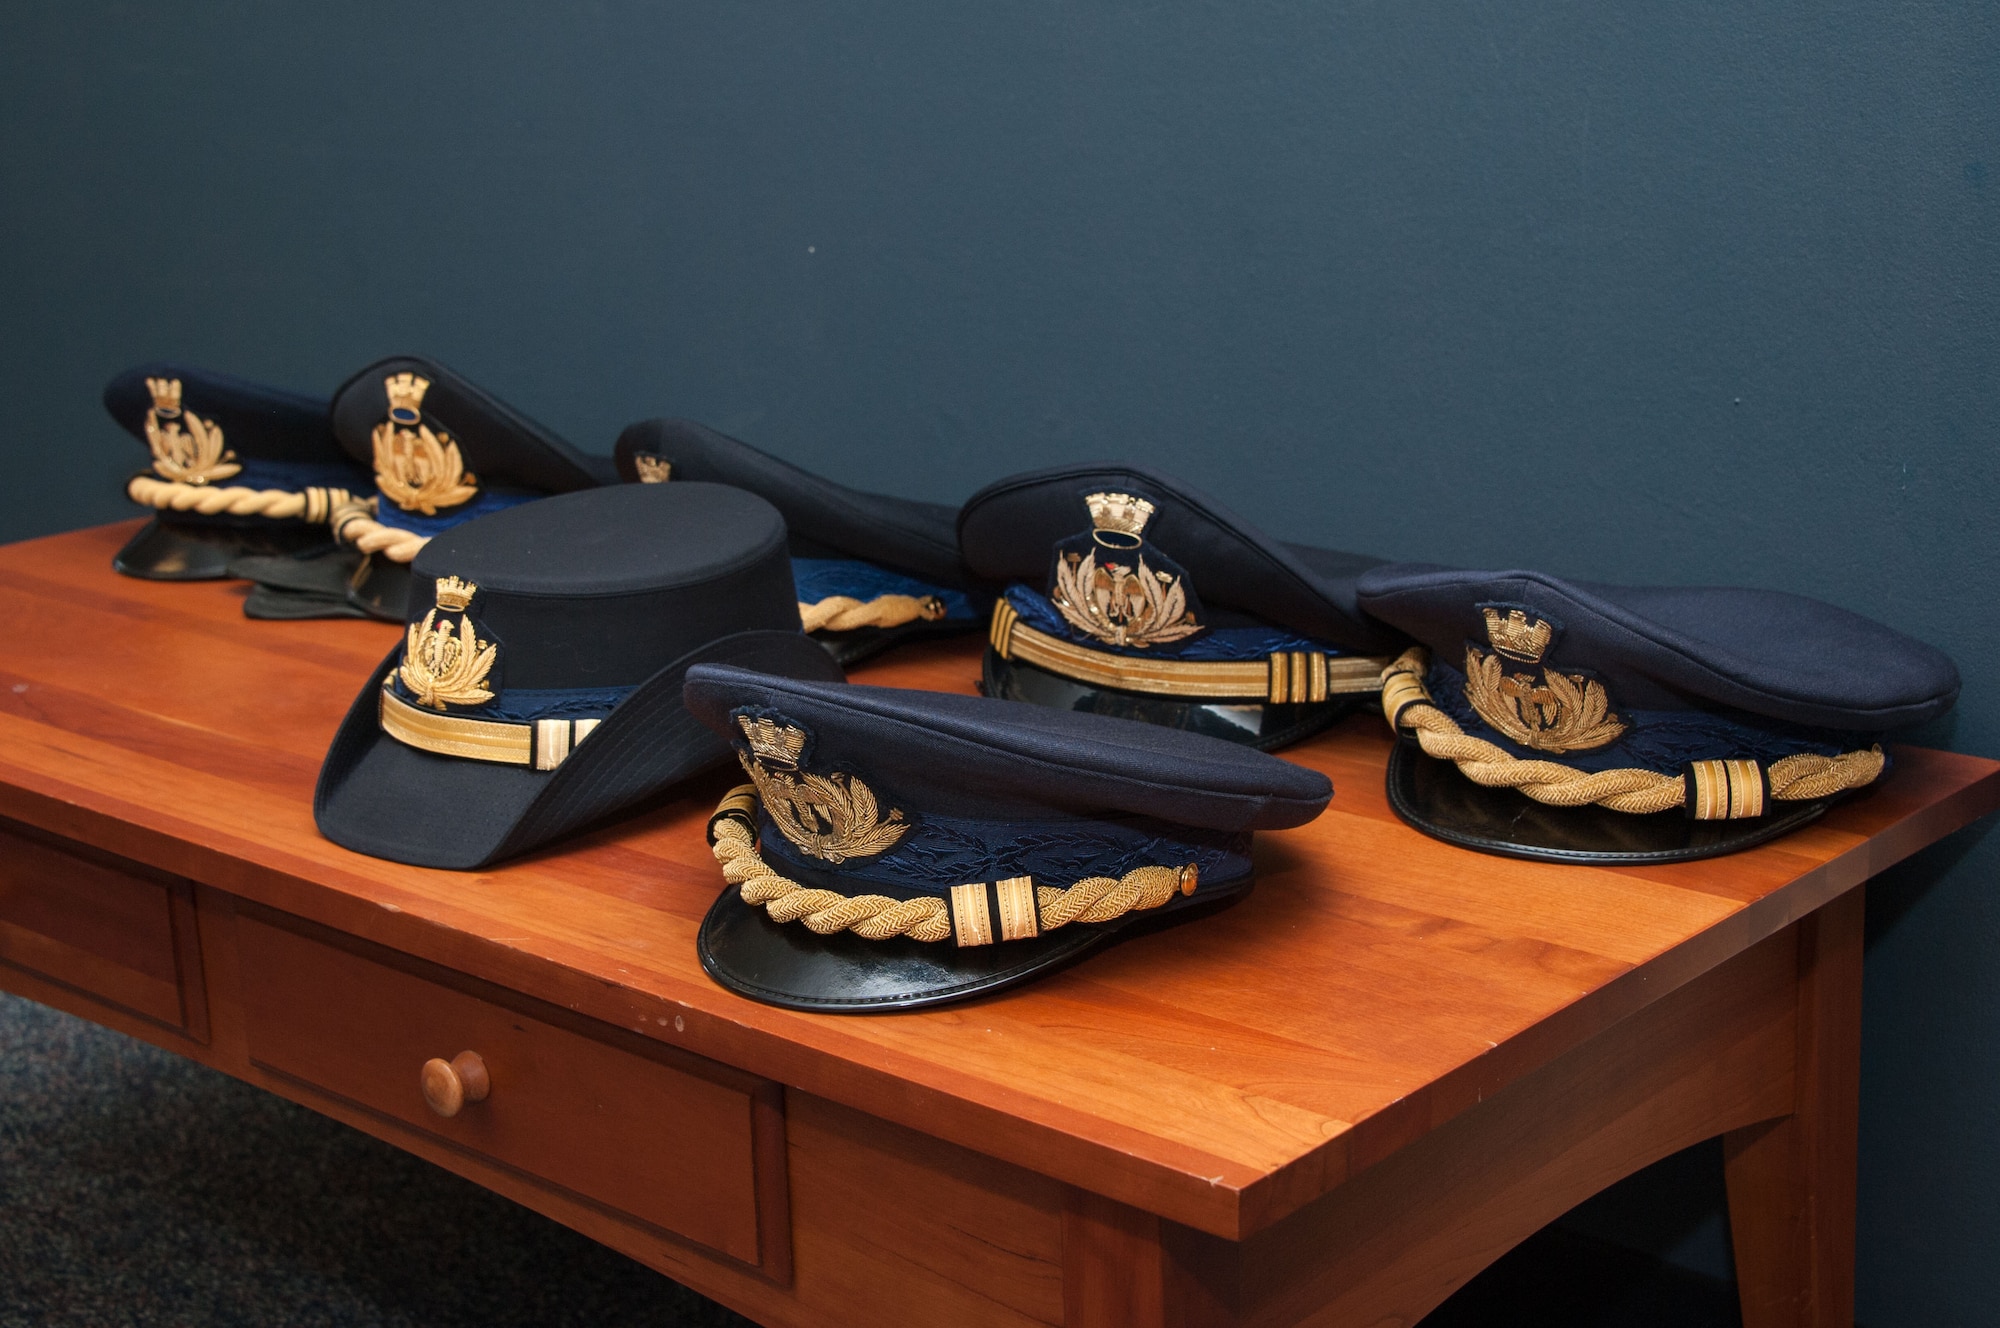 International Officers placed their uniformed hats on a table during the International Honor Roll Induction Ceremony at the International Officer School on Maxwell Air Force Base, Ala., on Feb. 10, 2017. The International Honor Roll program recognizes Air University international officer graduates who have attained a prominent position in their country, as well as their accomplishments as Air University international military students. (US Air Force photo by Bud Hancock)